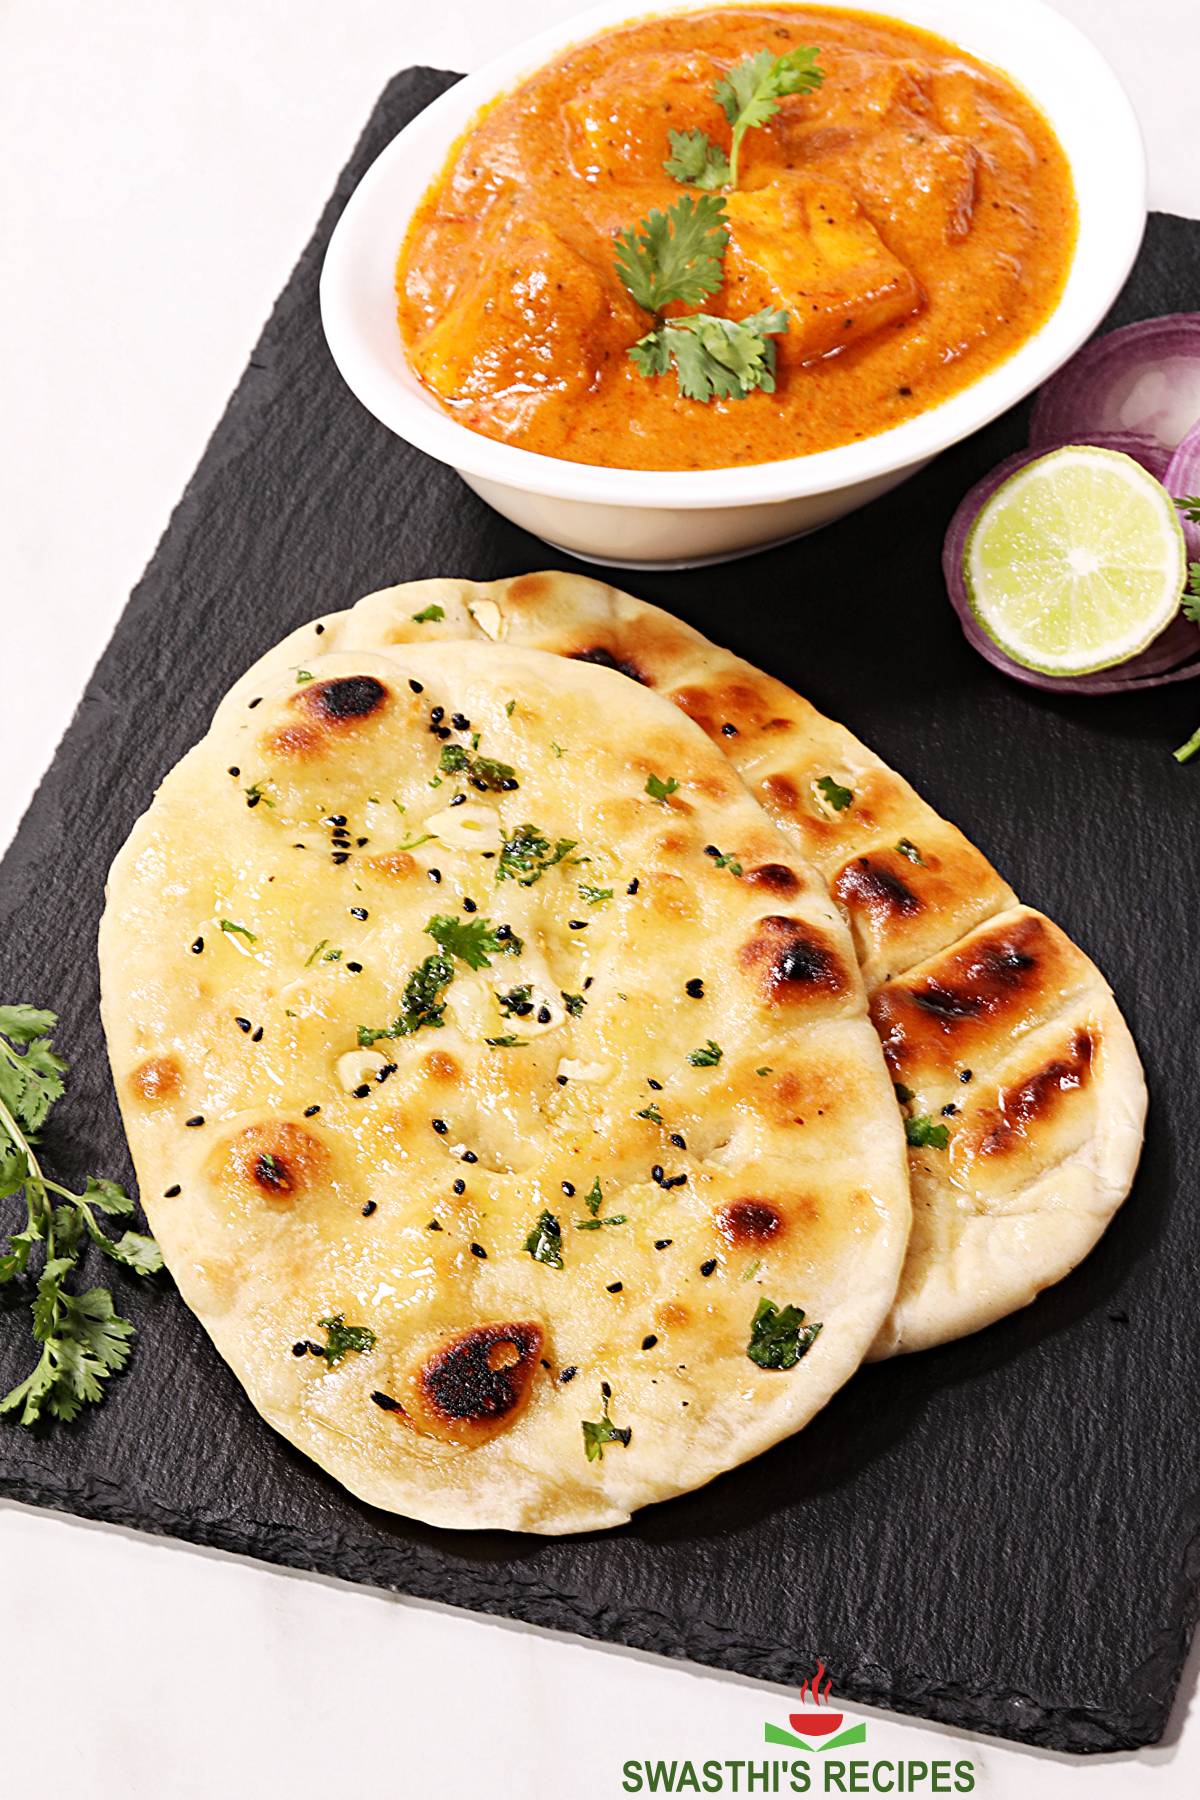 Butter Naan Recipe - Swasthi's Recipes